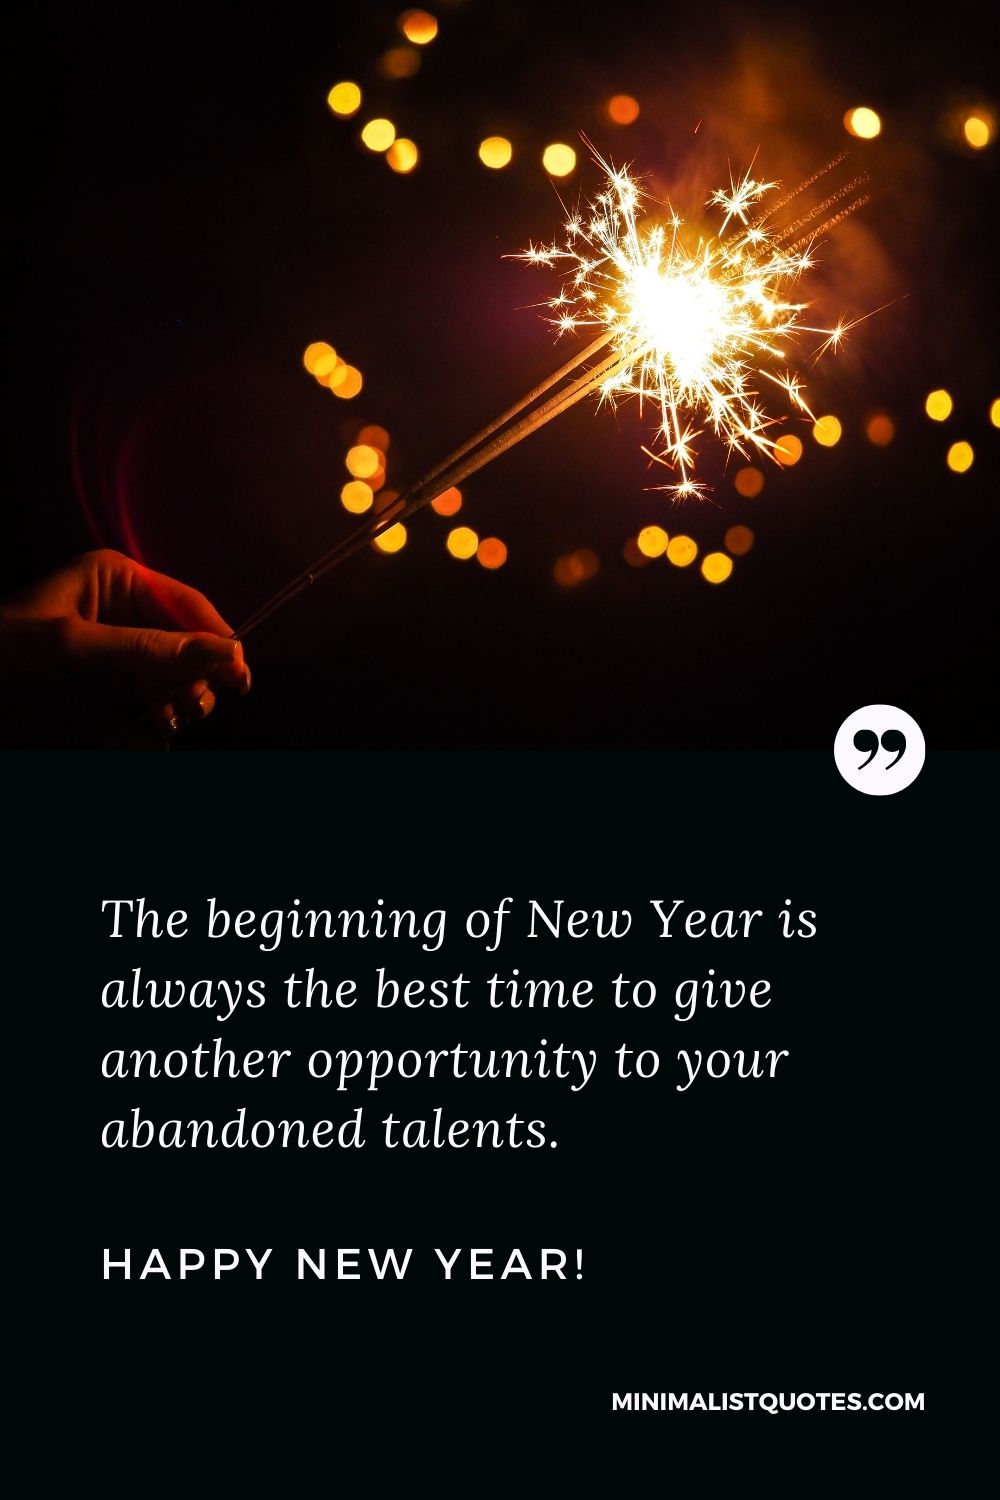 The beginning of New Year is always the best time to give another ...